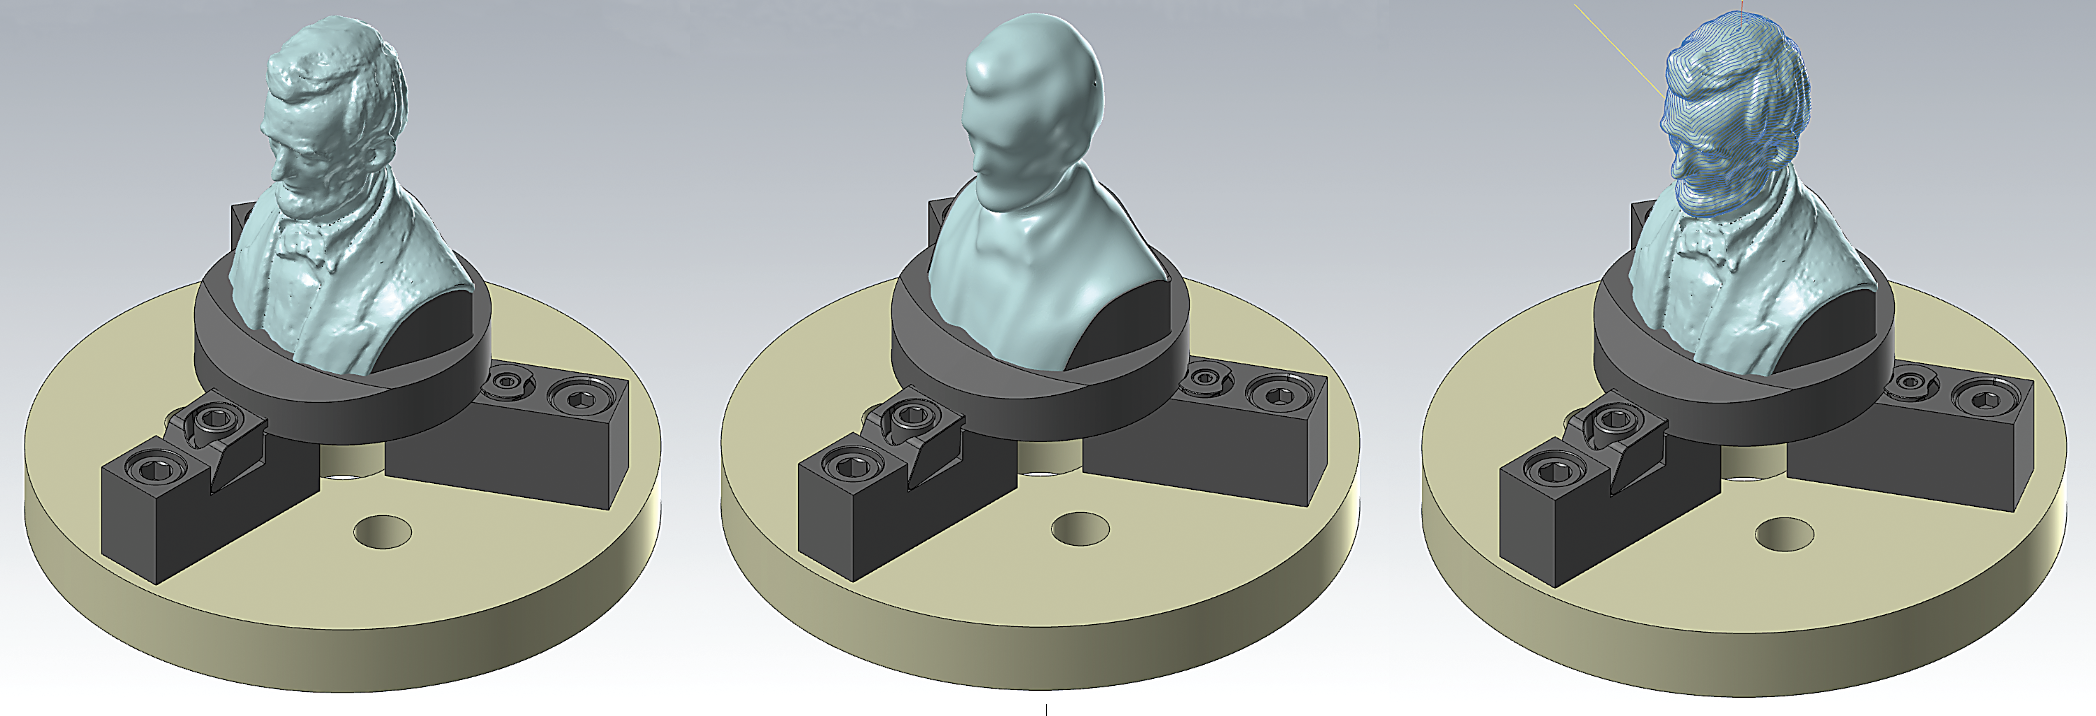 The original CAD model of the bust of Abraham Lincoln. In the middle is the smoothed model of the bust achieved through use of mesh-editing CAD tools. At right are the new toolpaths created after using mesh-editing tools.